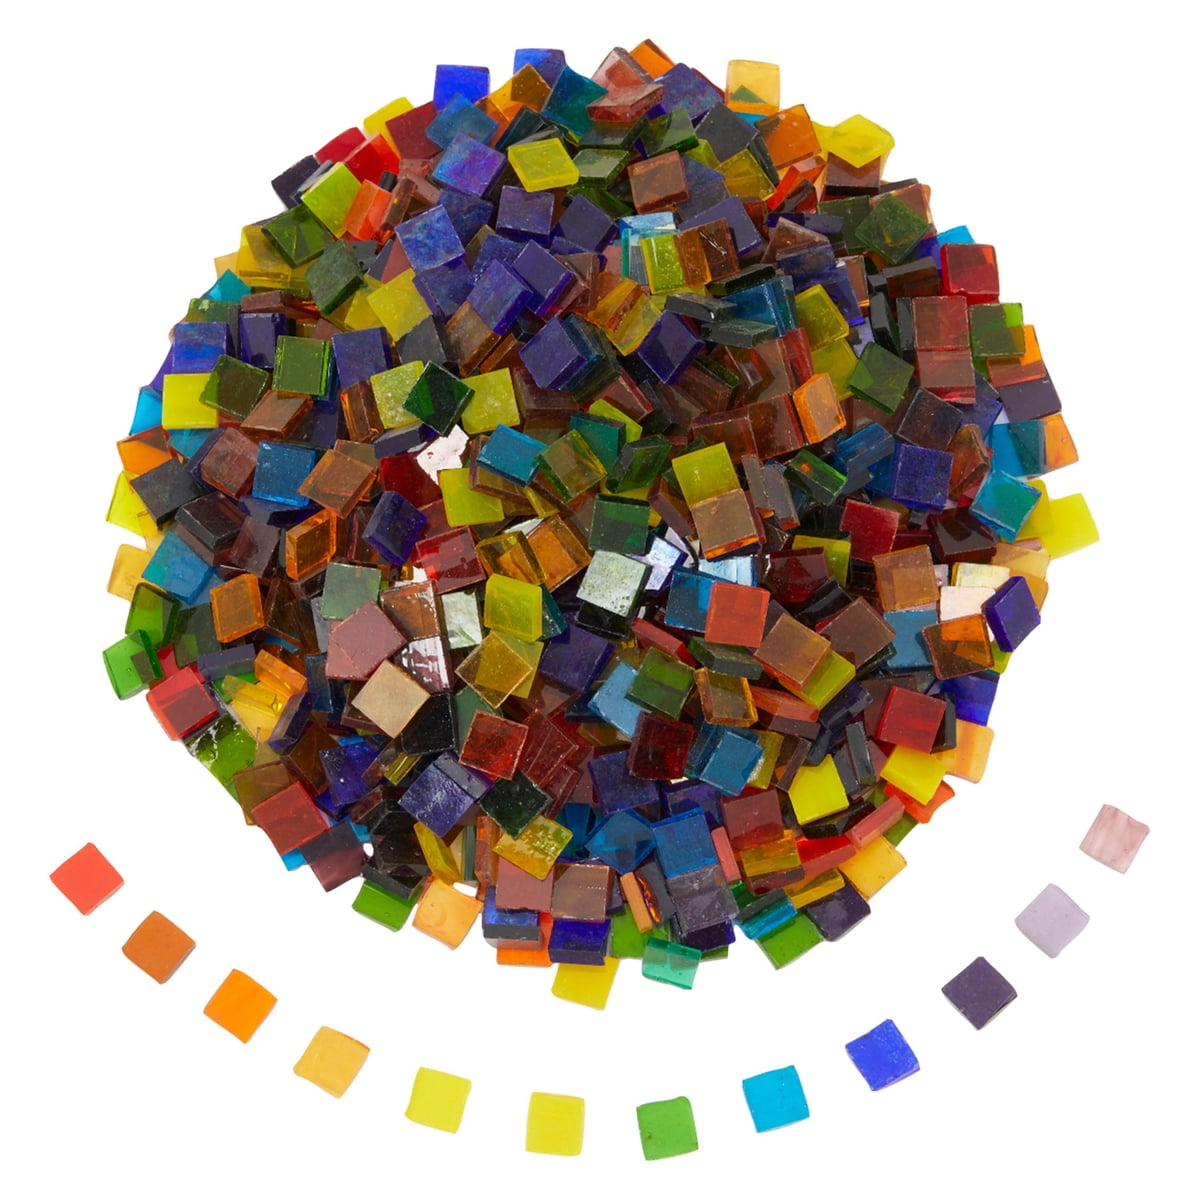 1000 Pieces Mixed Color Mosaic Tiles Mosaic Glass Pieces for Home Decoration or 